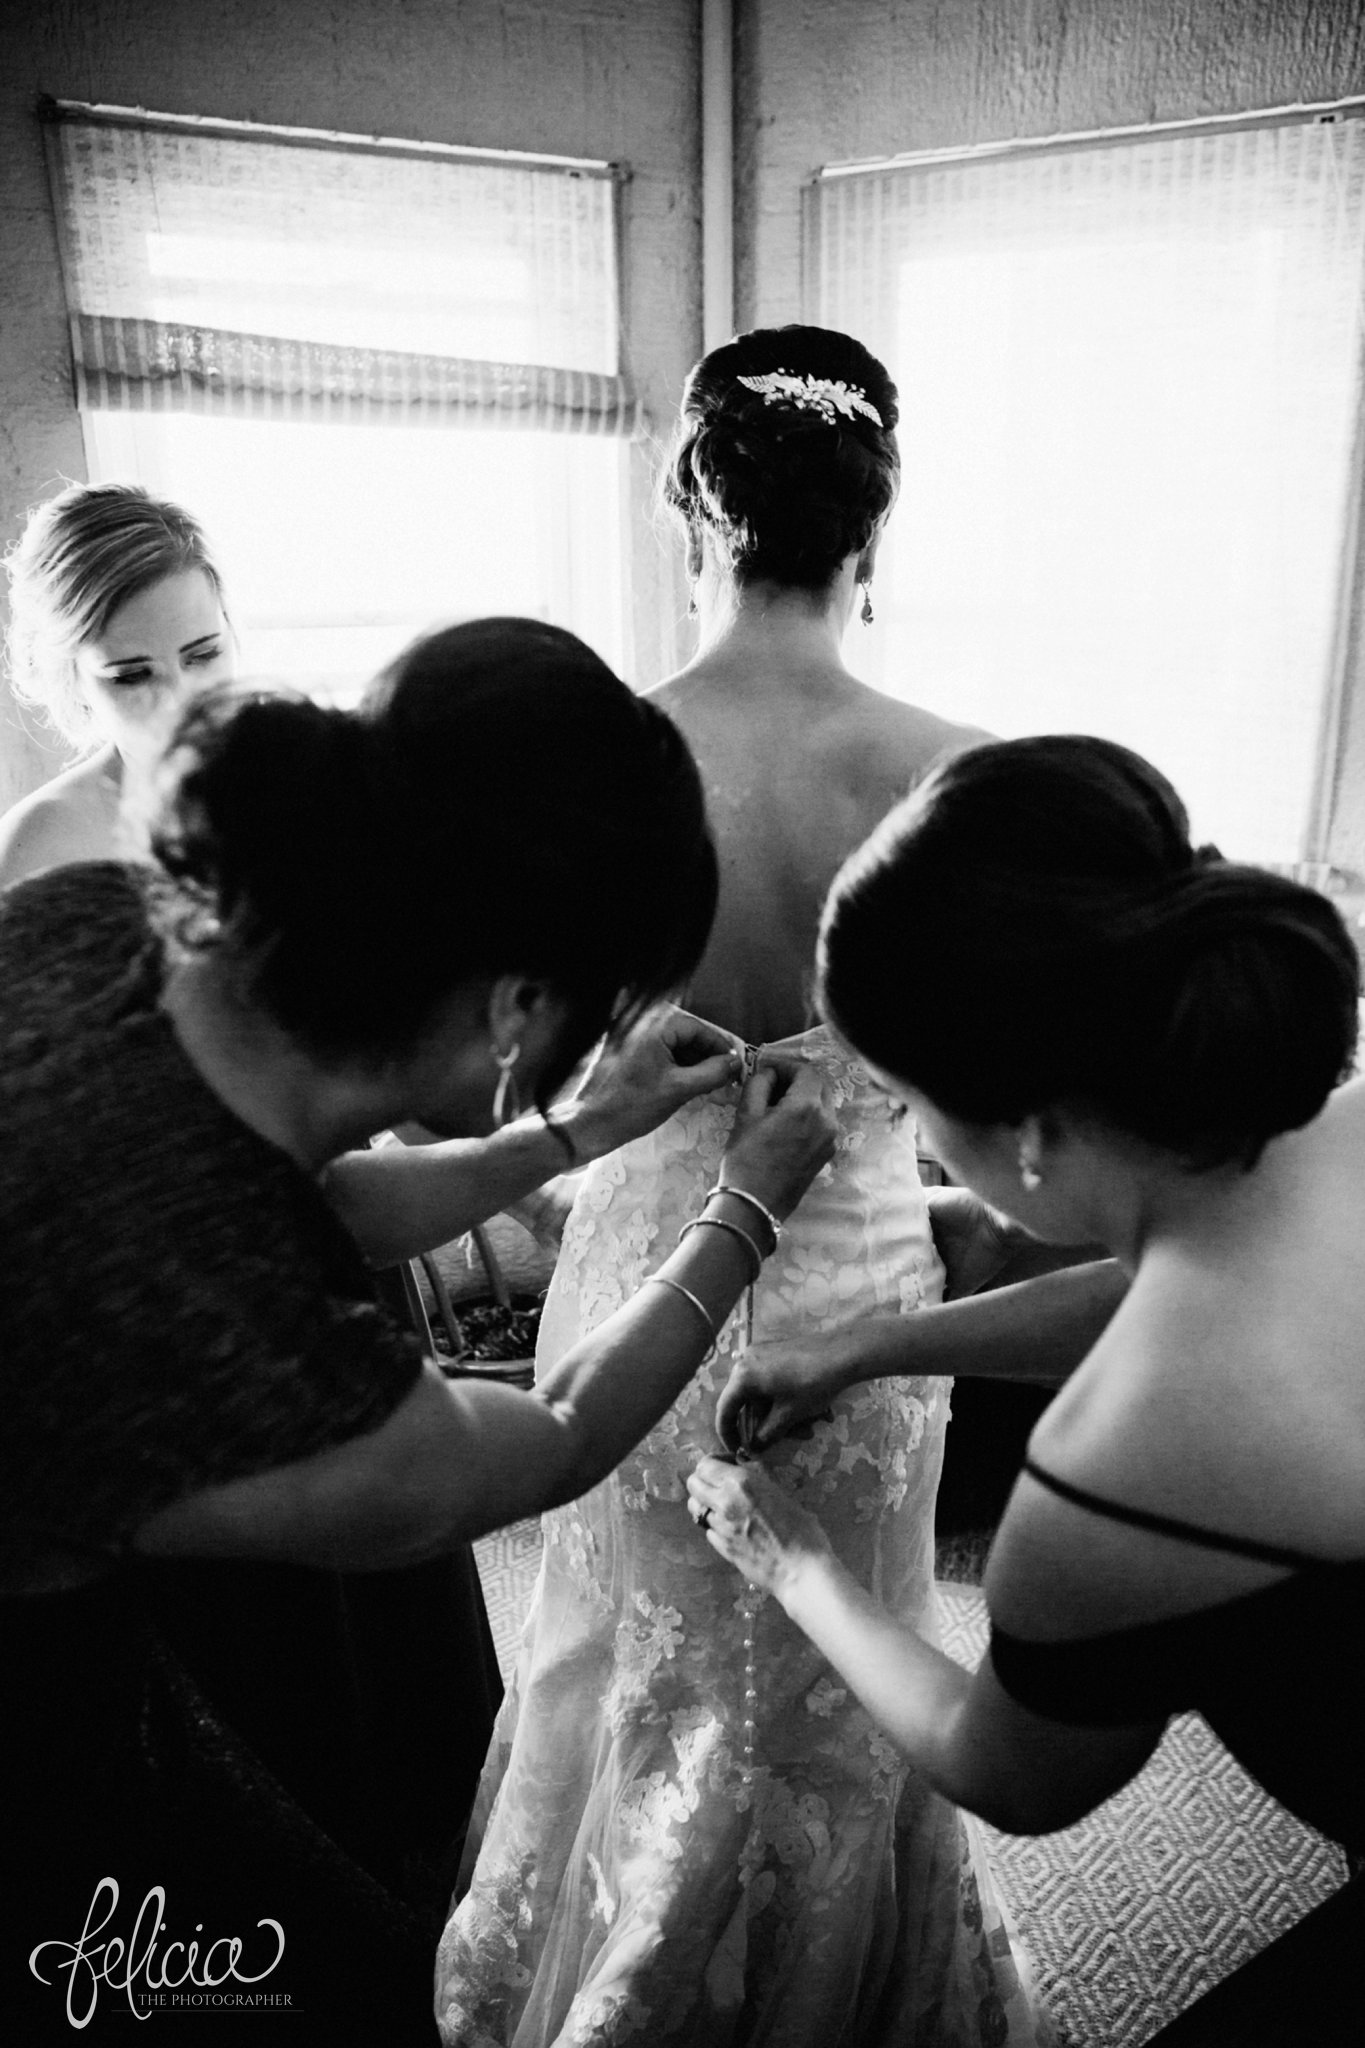 images by feliciathephotographer.com | wedding photographer | kansas city | getting ready | putting on the dress | bridesmaids | buttons | lace floral dress | strapless | emily hart | black and white | 